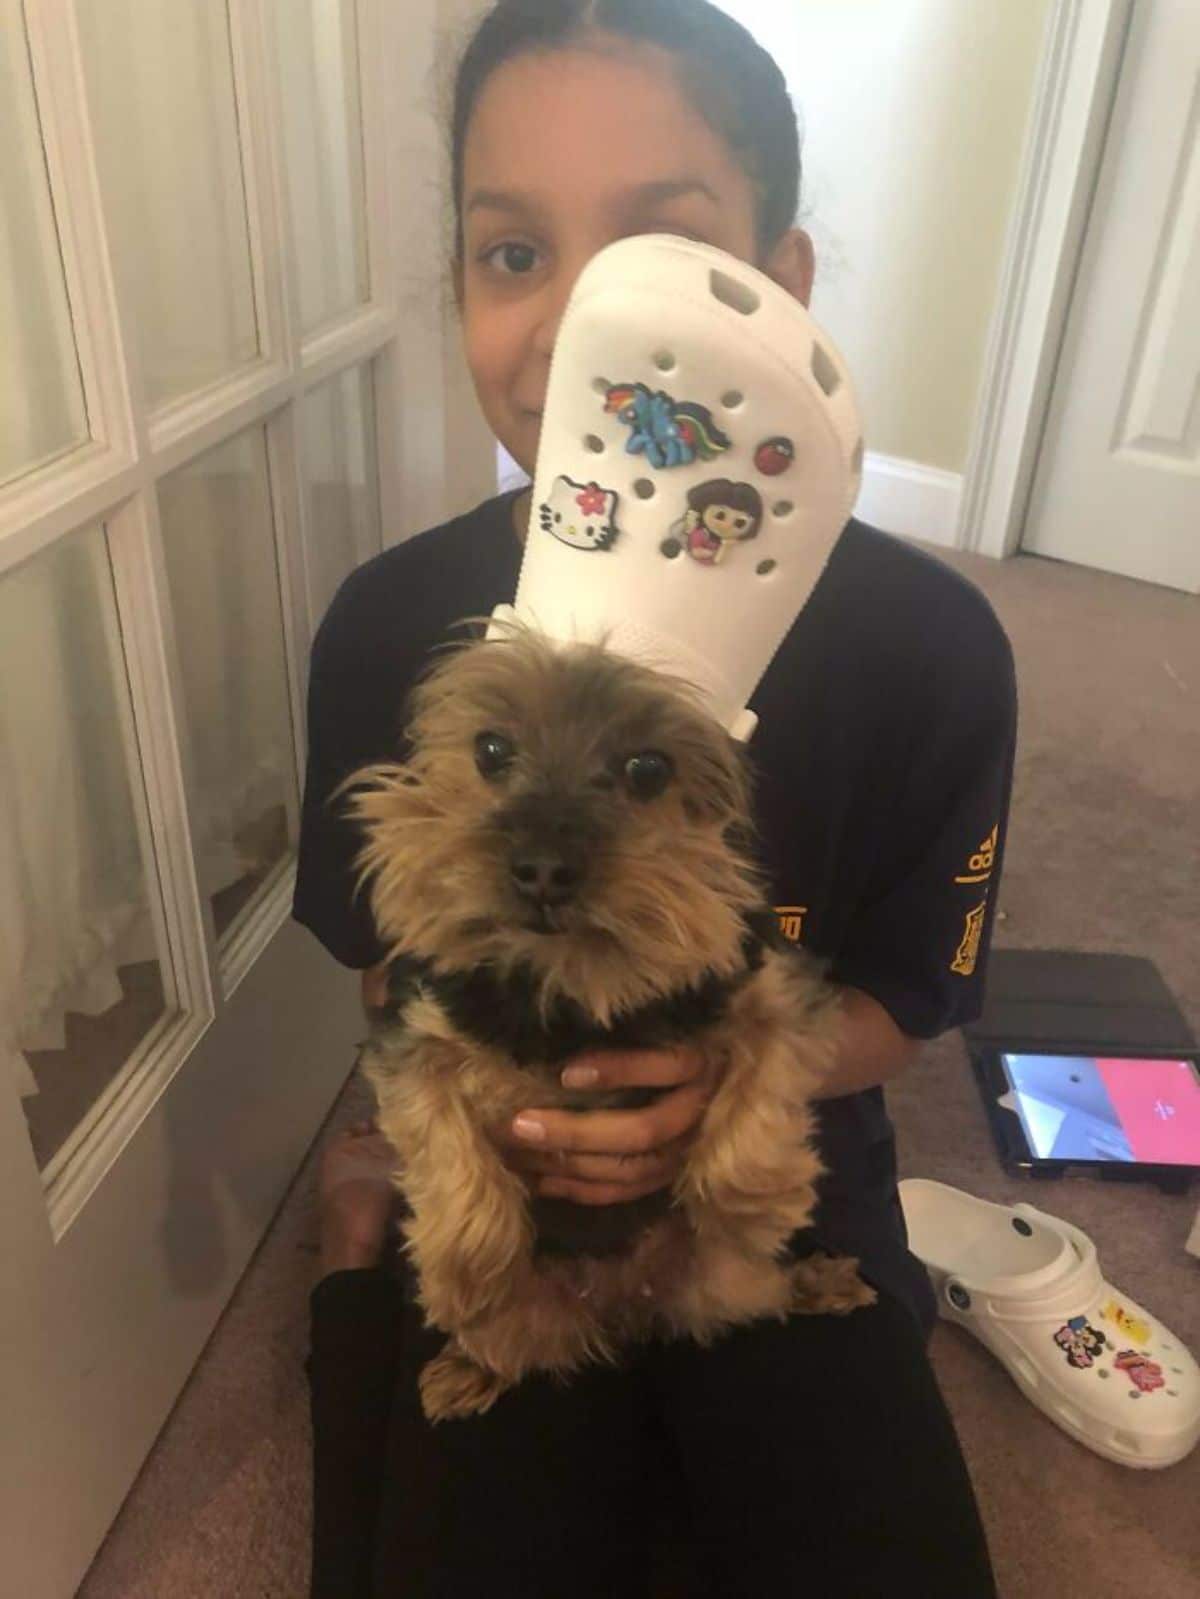 fluffy brown and black dog being held on someone's lap and wearing white crocs slipper on the head